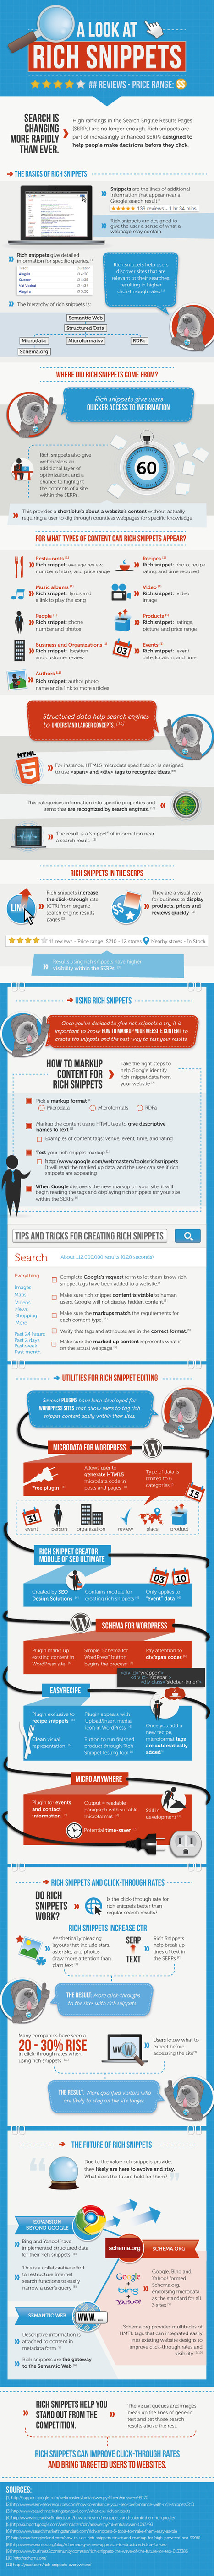 A Visual Guide to Rich Snippets | Time to Learn | Scoop.it